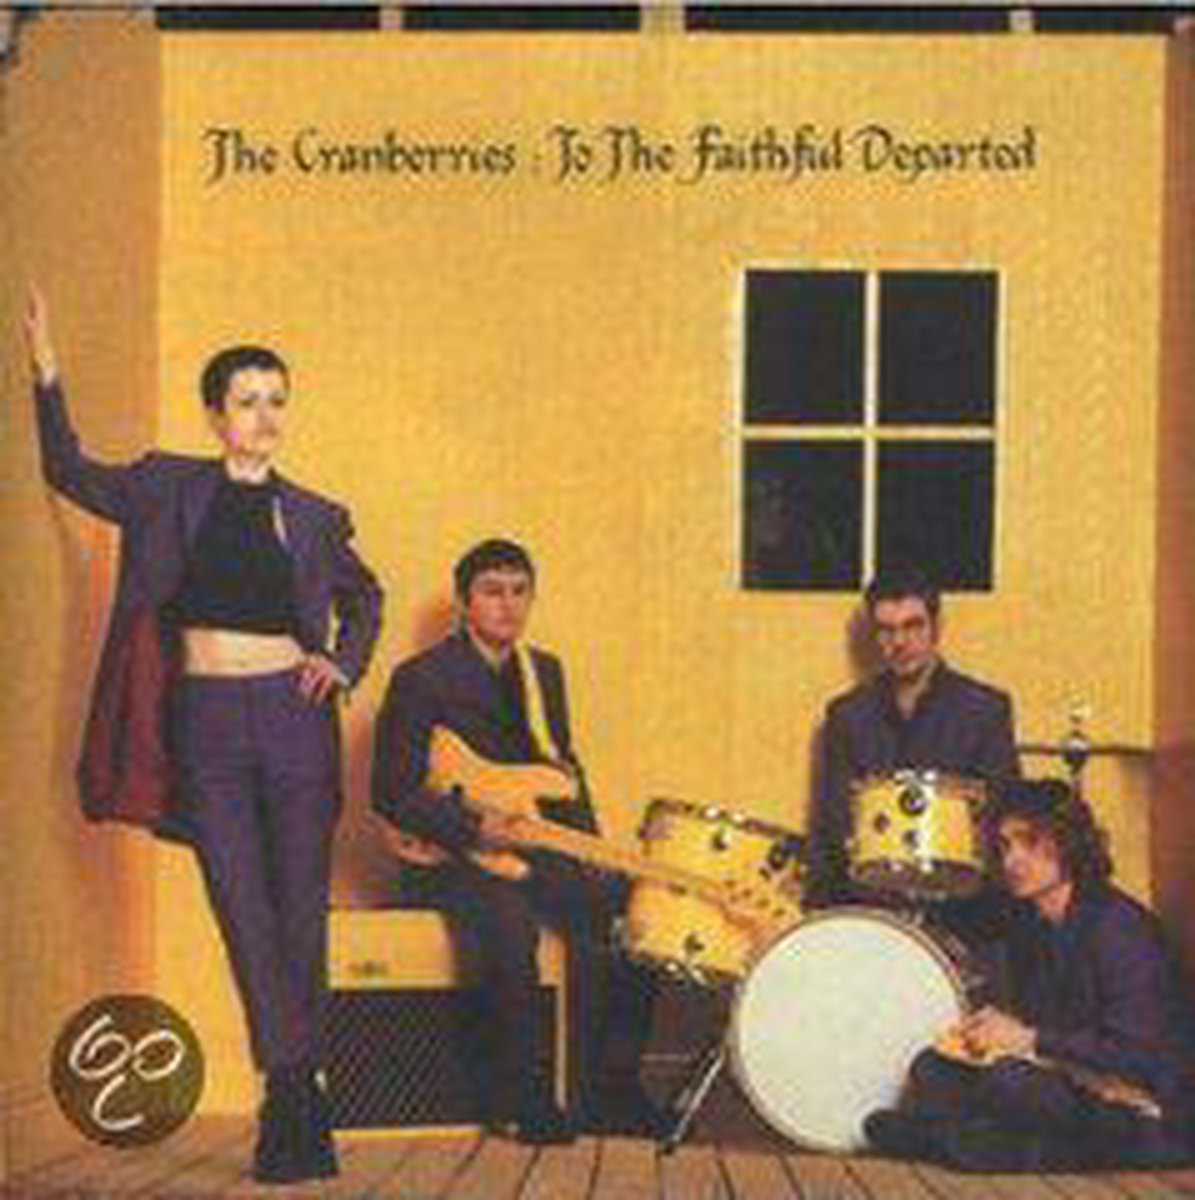 To The Faithful Departed - the Cranberries